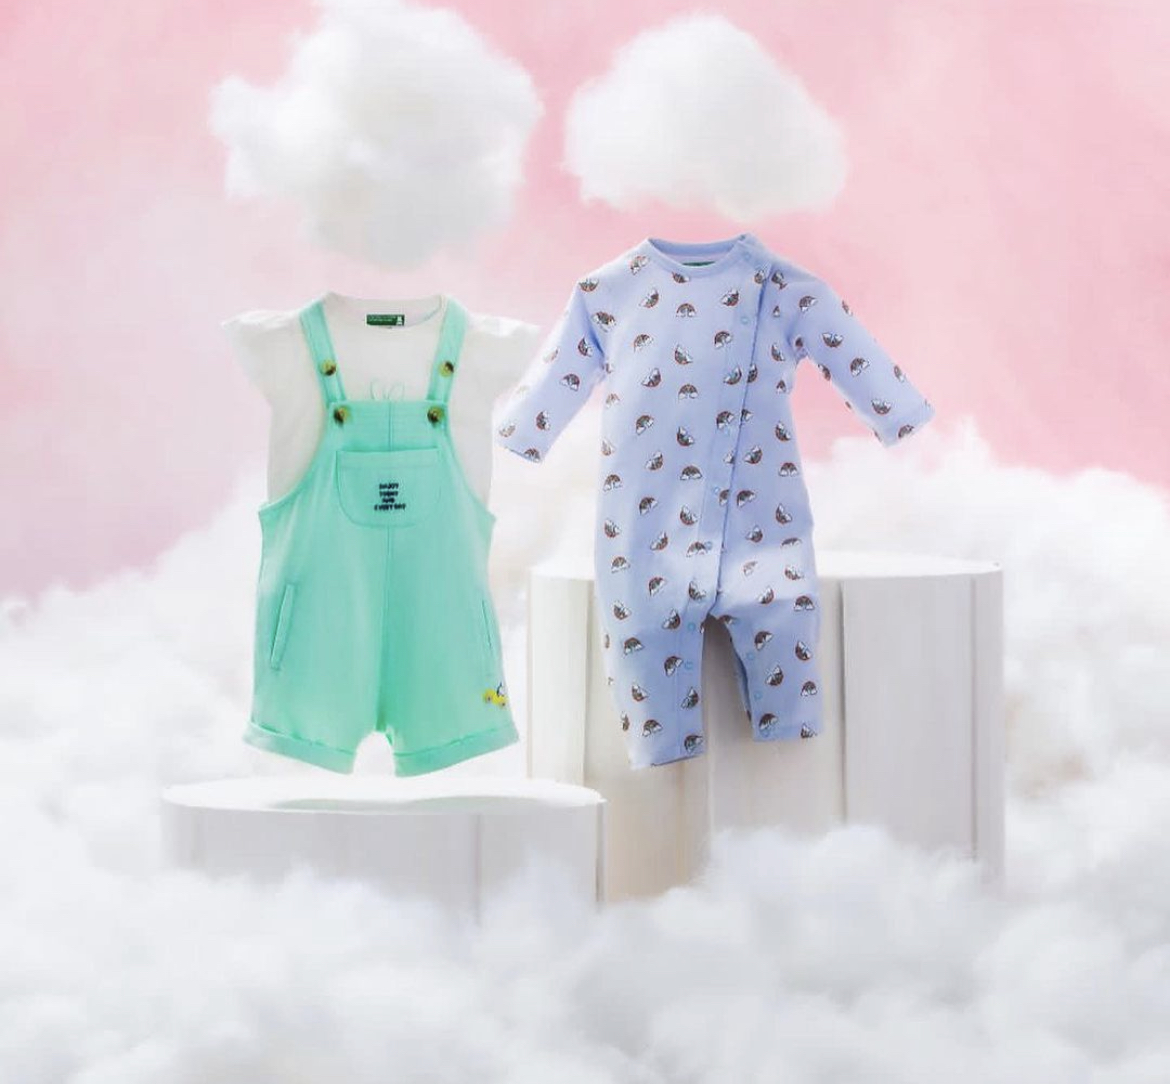 Benetton unveils a newborn apparel collection in India - Asian News from UK